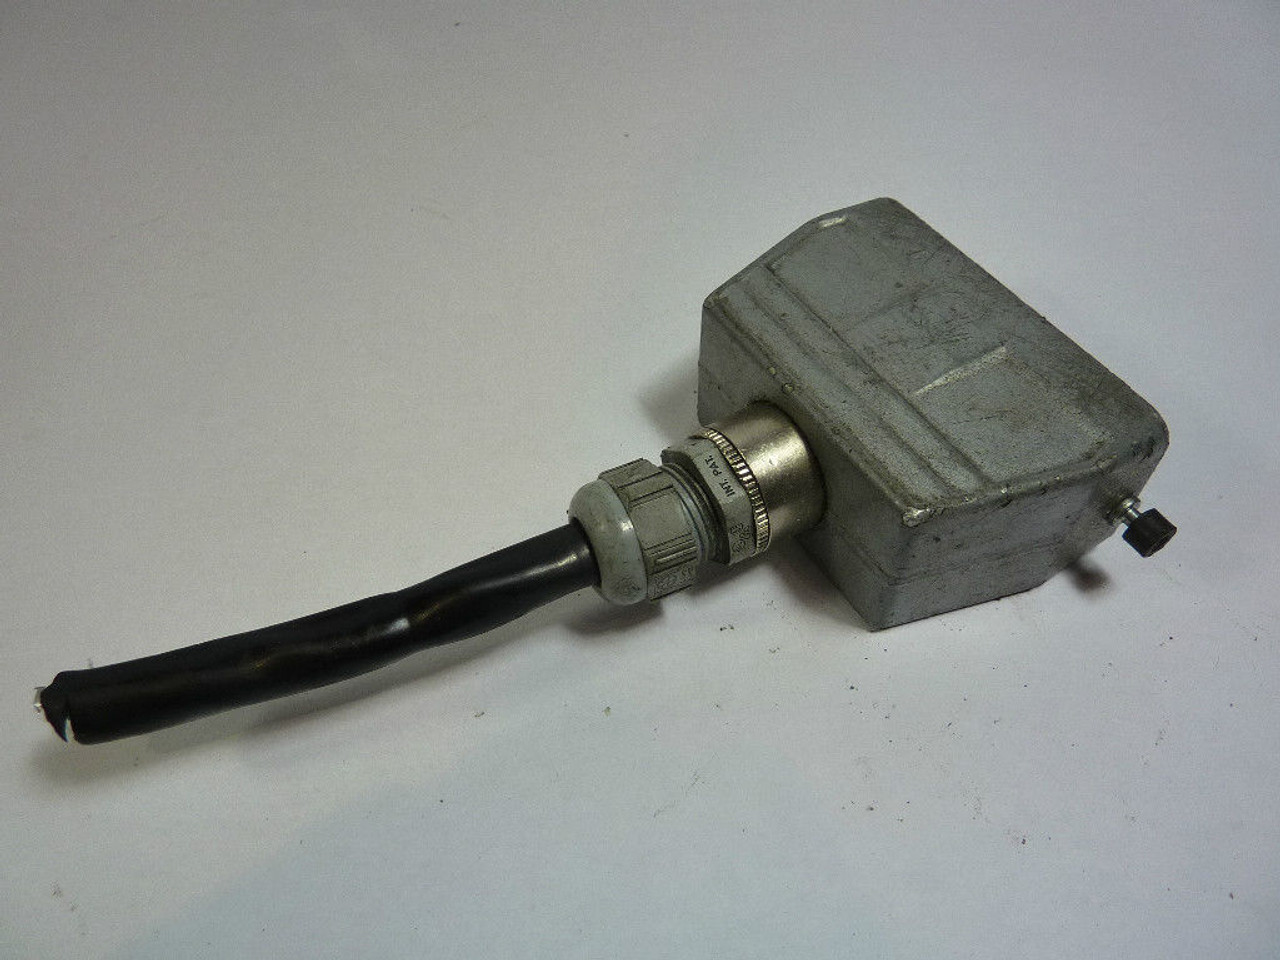 Contact H-BE10.1950 Connector Receptacle 16 Amp 380V USED